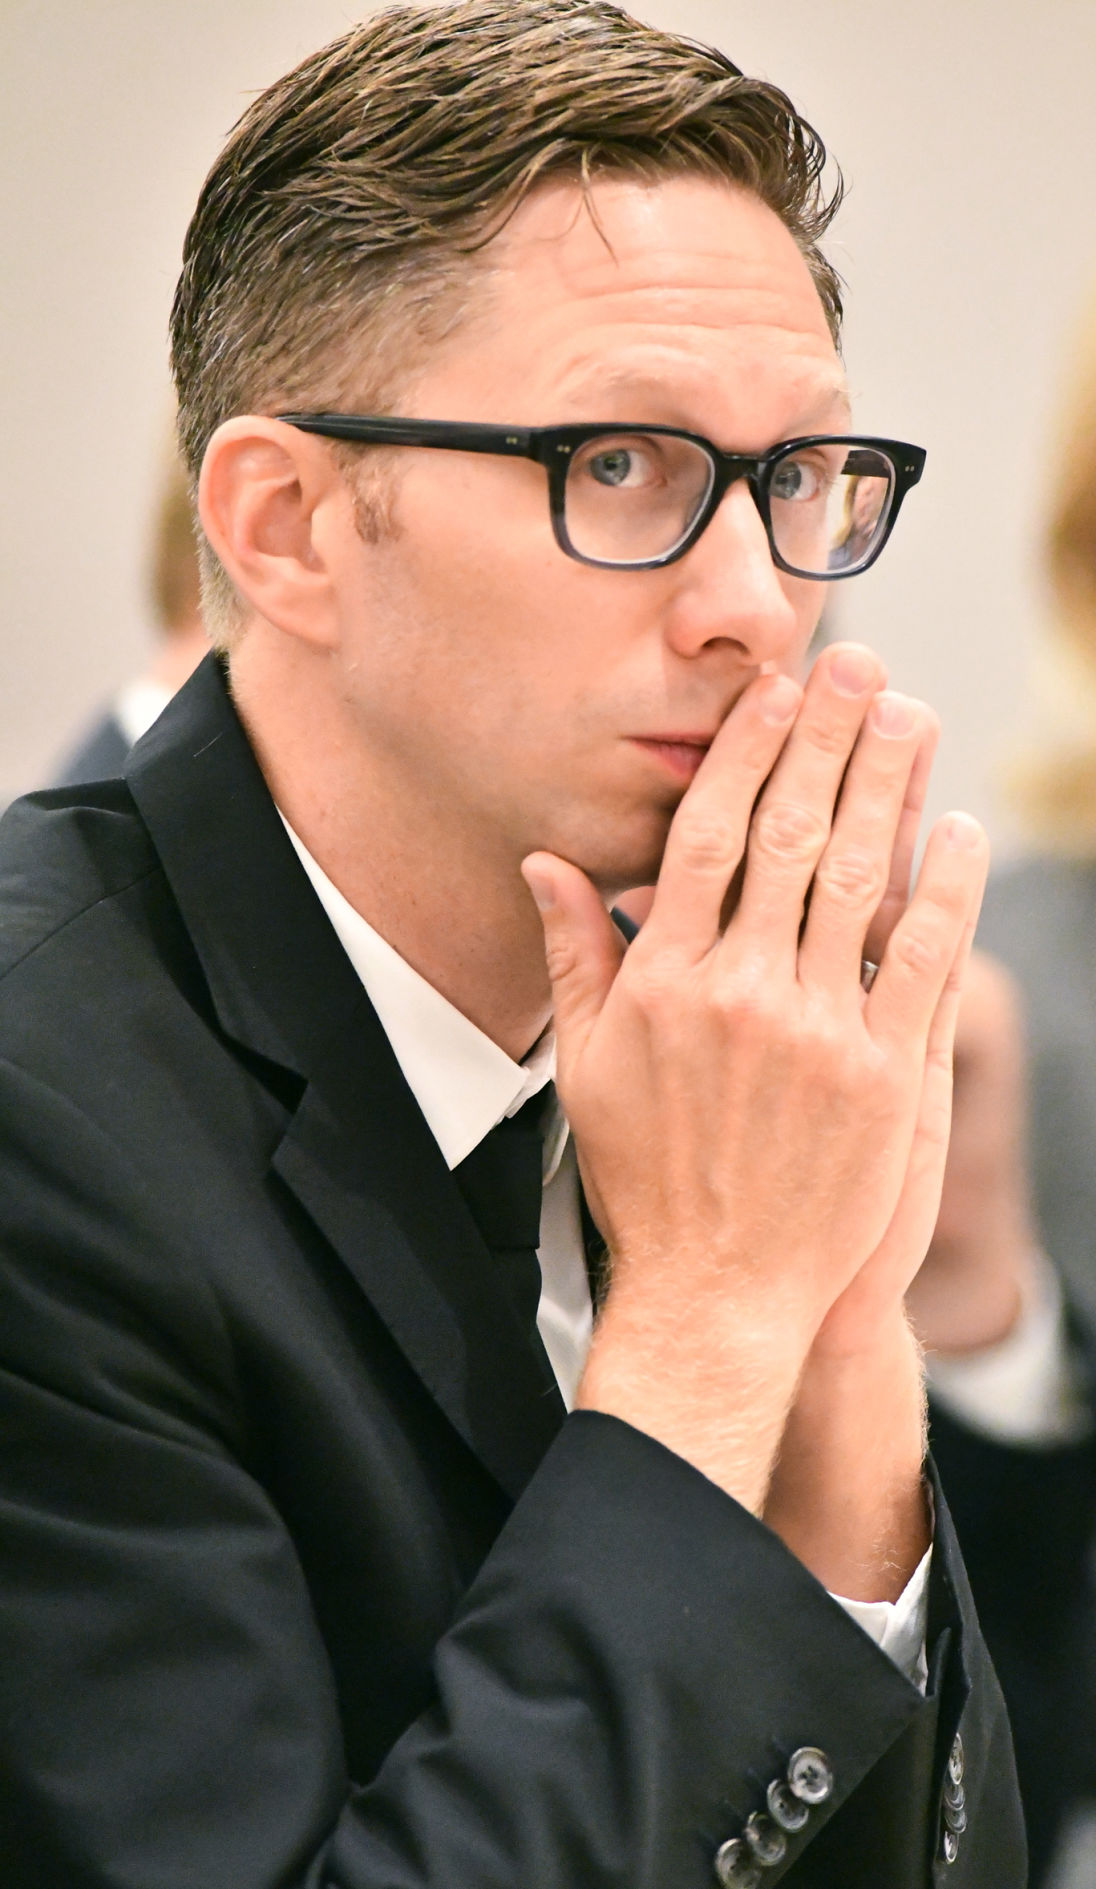 Former church leader Chad Robison sentenced to 11 years for possessing illicit pornography, recordings Crime and Courts chronicleonline image pic